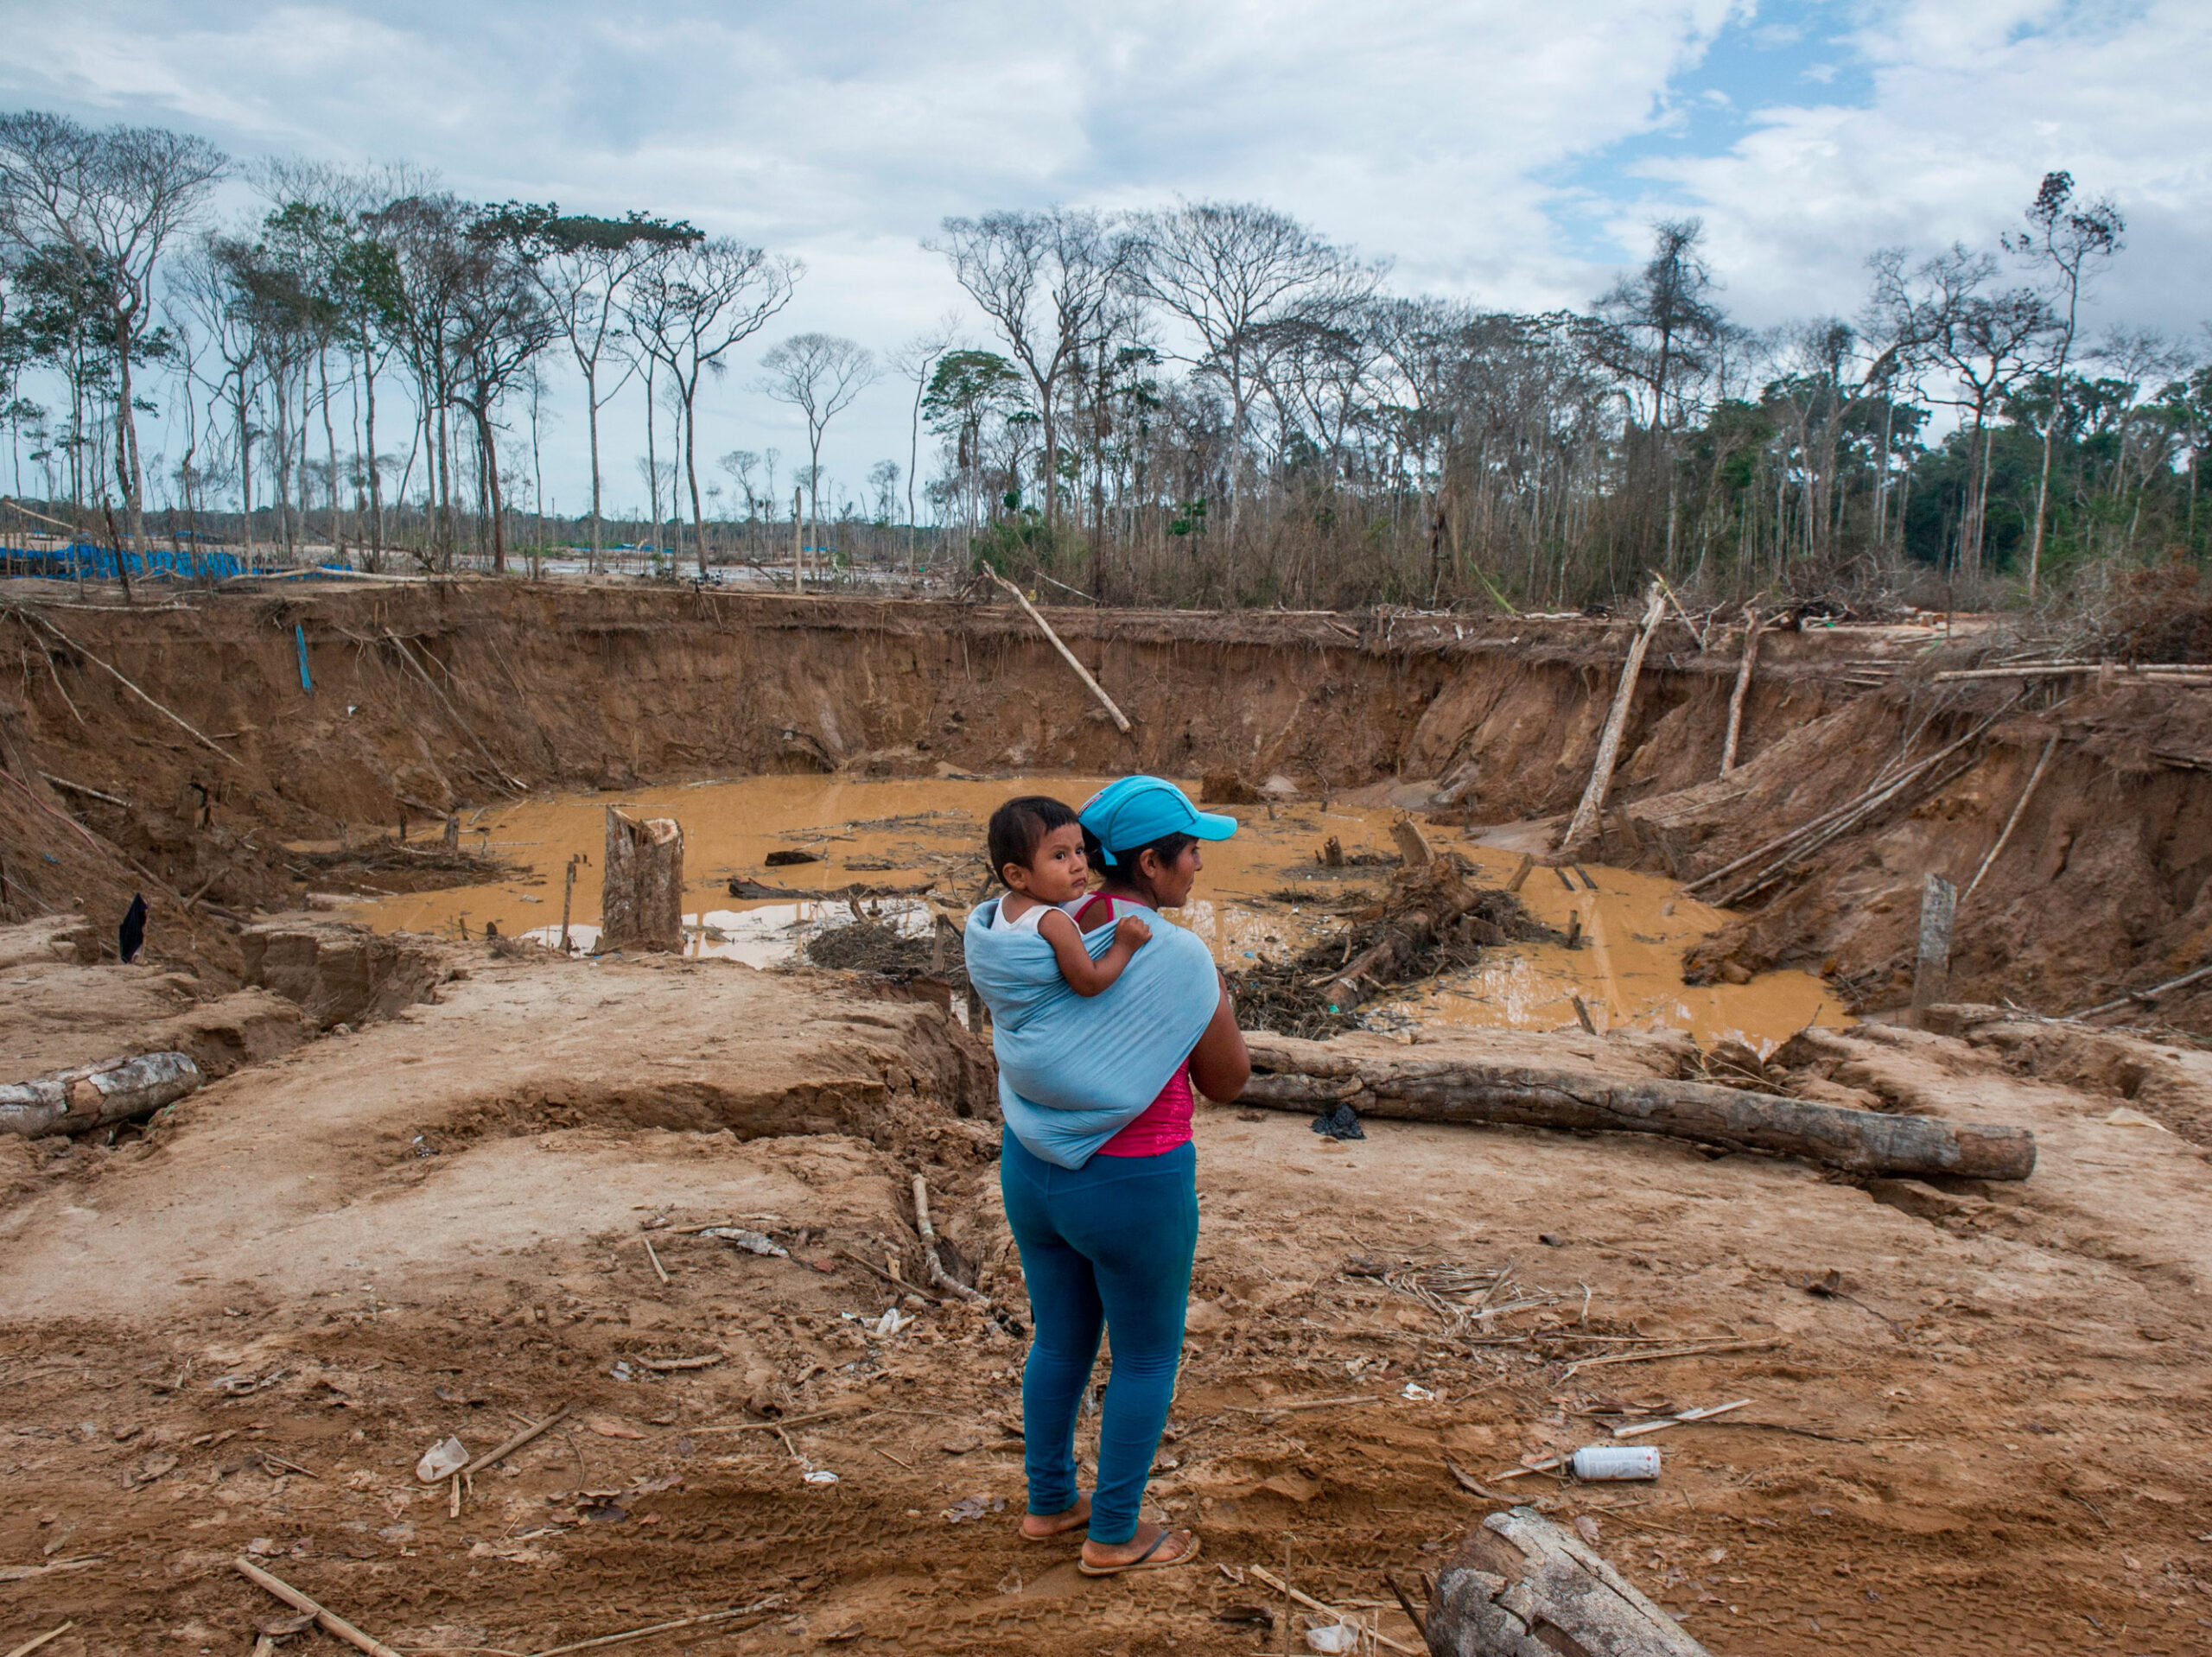 A woman and her child stand in front of a landscape denuded by gold mining in the southern Peruvian jungle in the Madre de Dios region. This picture is from 2015. Today, there's an effort to plant saplings to revive the forest.